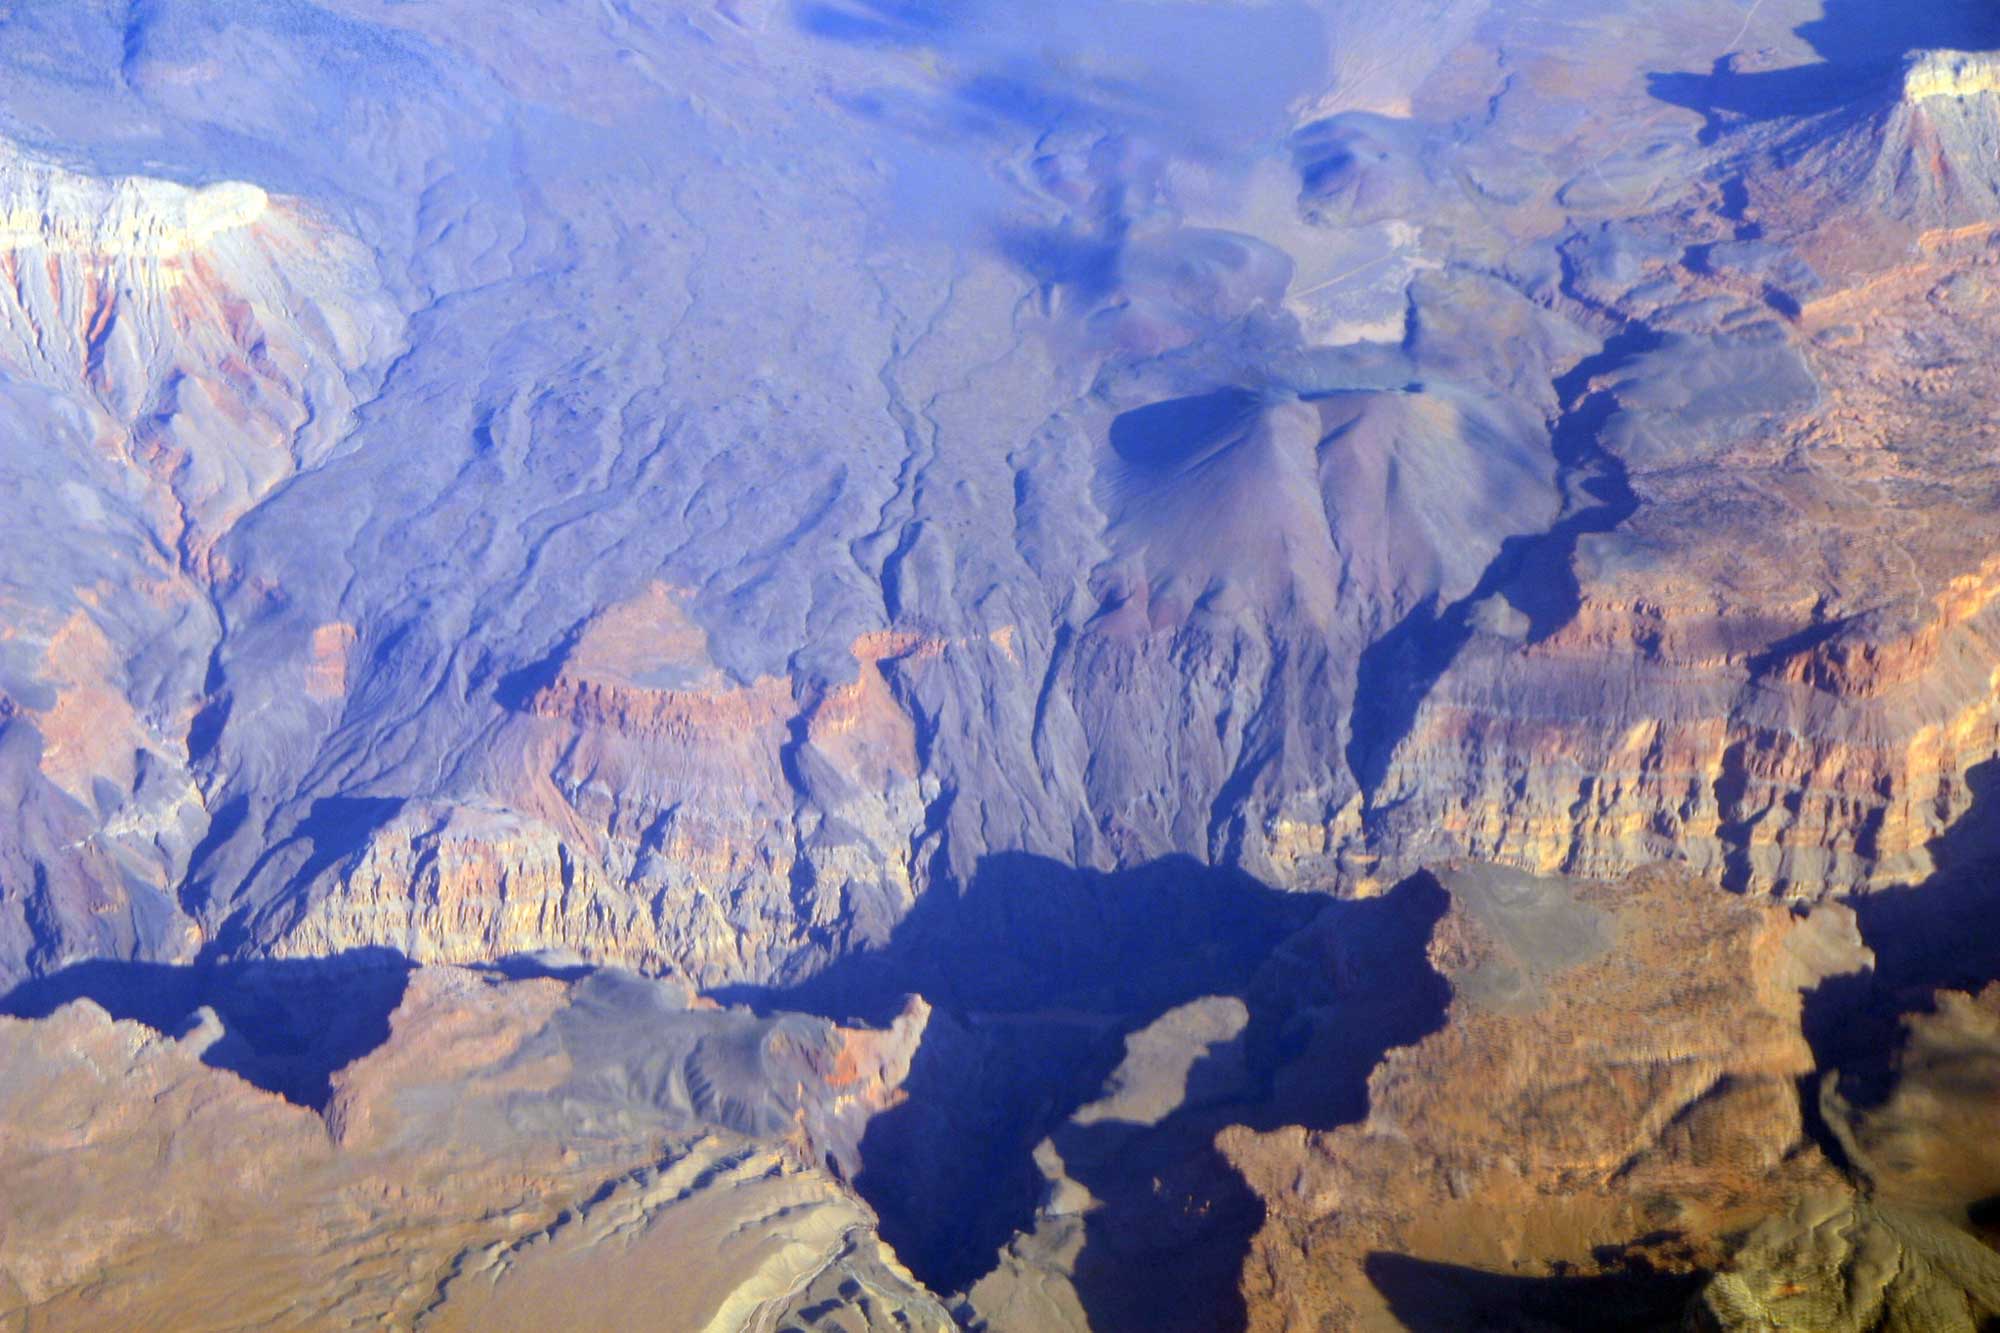 Photograph of the Uinkaret Volcanic Field at the Grand Canyon.